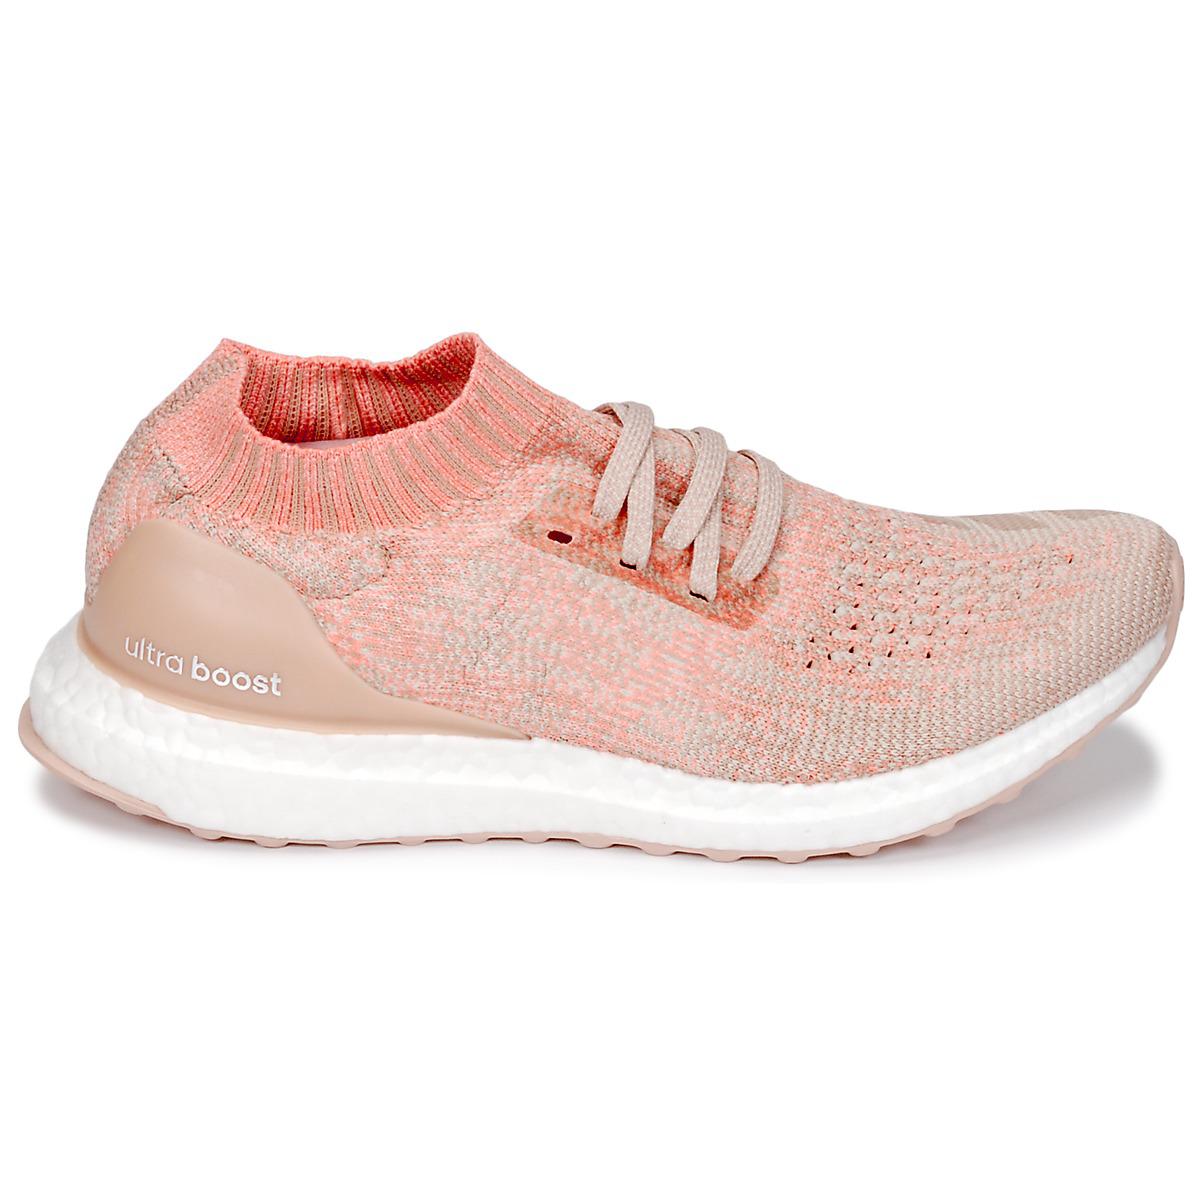 adidas ultra boost uncaged womens pink, Off 60%, www.scrimaglio.com